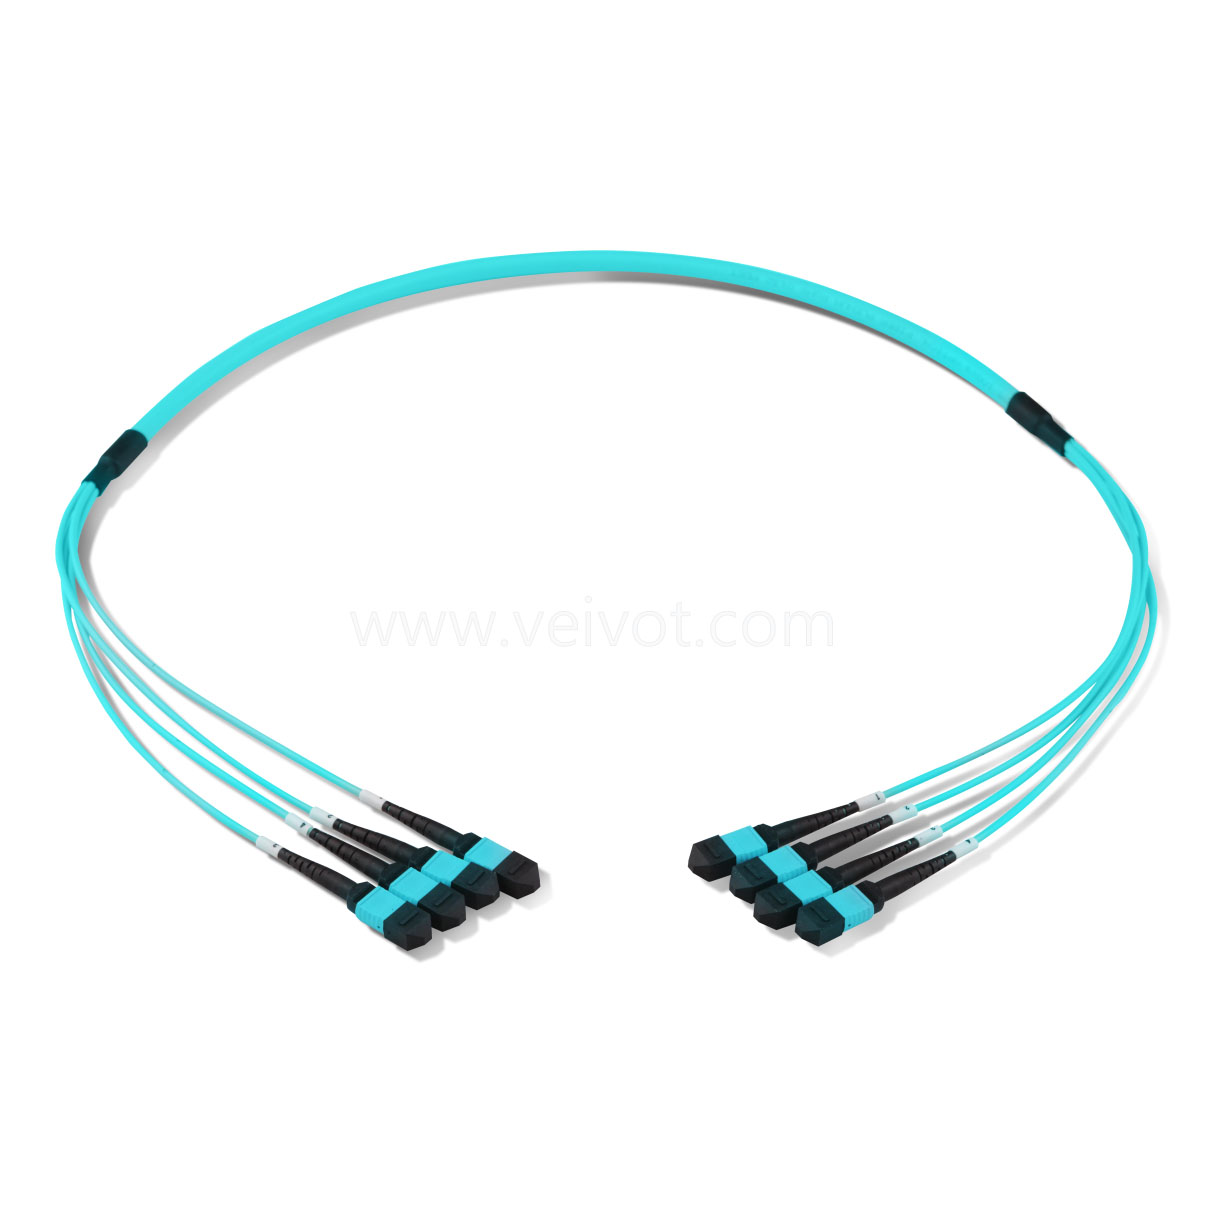 4xMPO-4xMPO Breakout Trunk Cable Singlemode Multimode